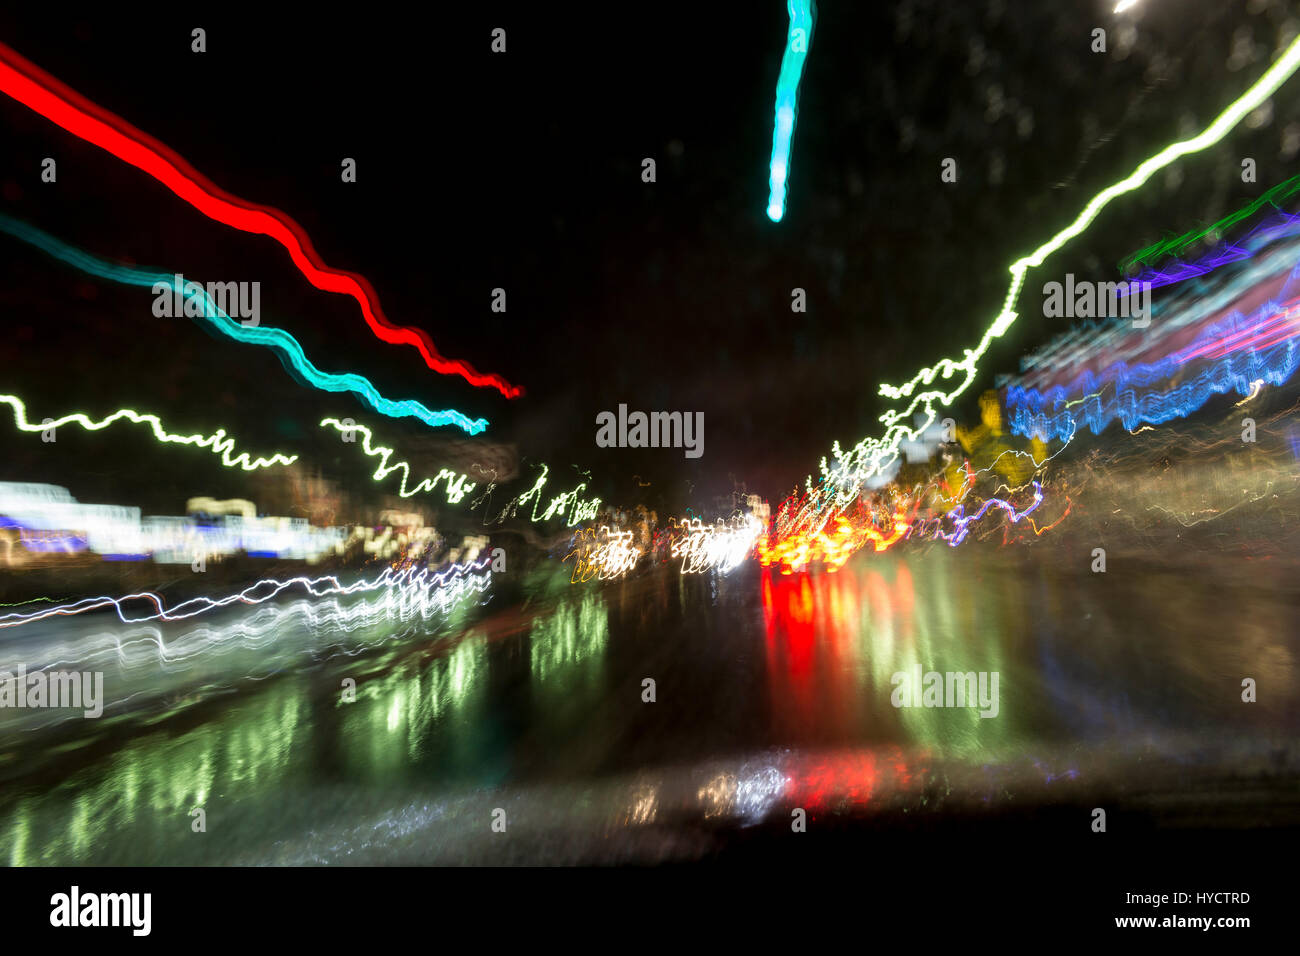 night shot of colorful car light trails with red and green reflections on wet street Stock Photo